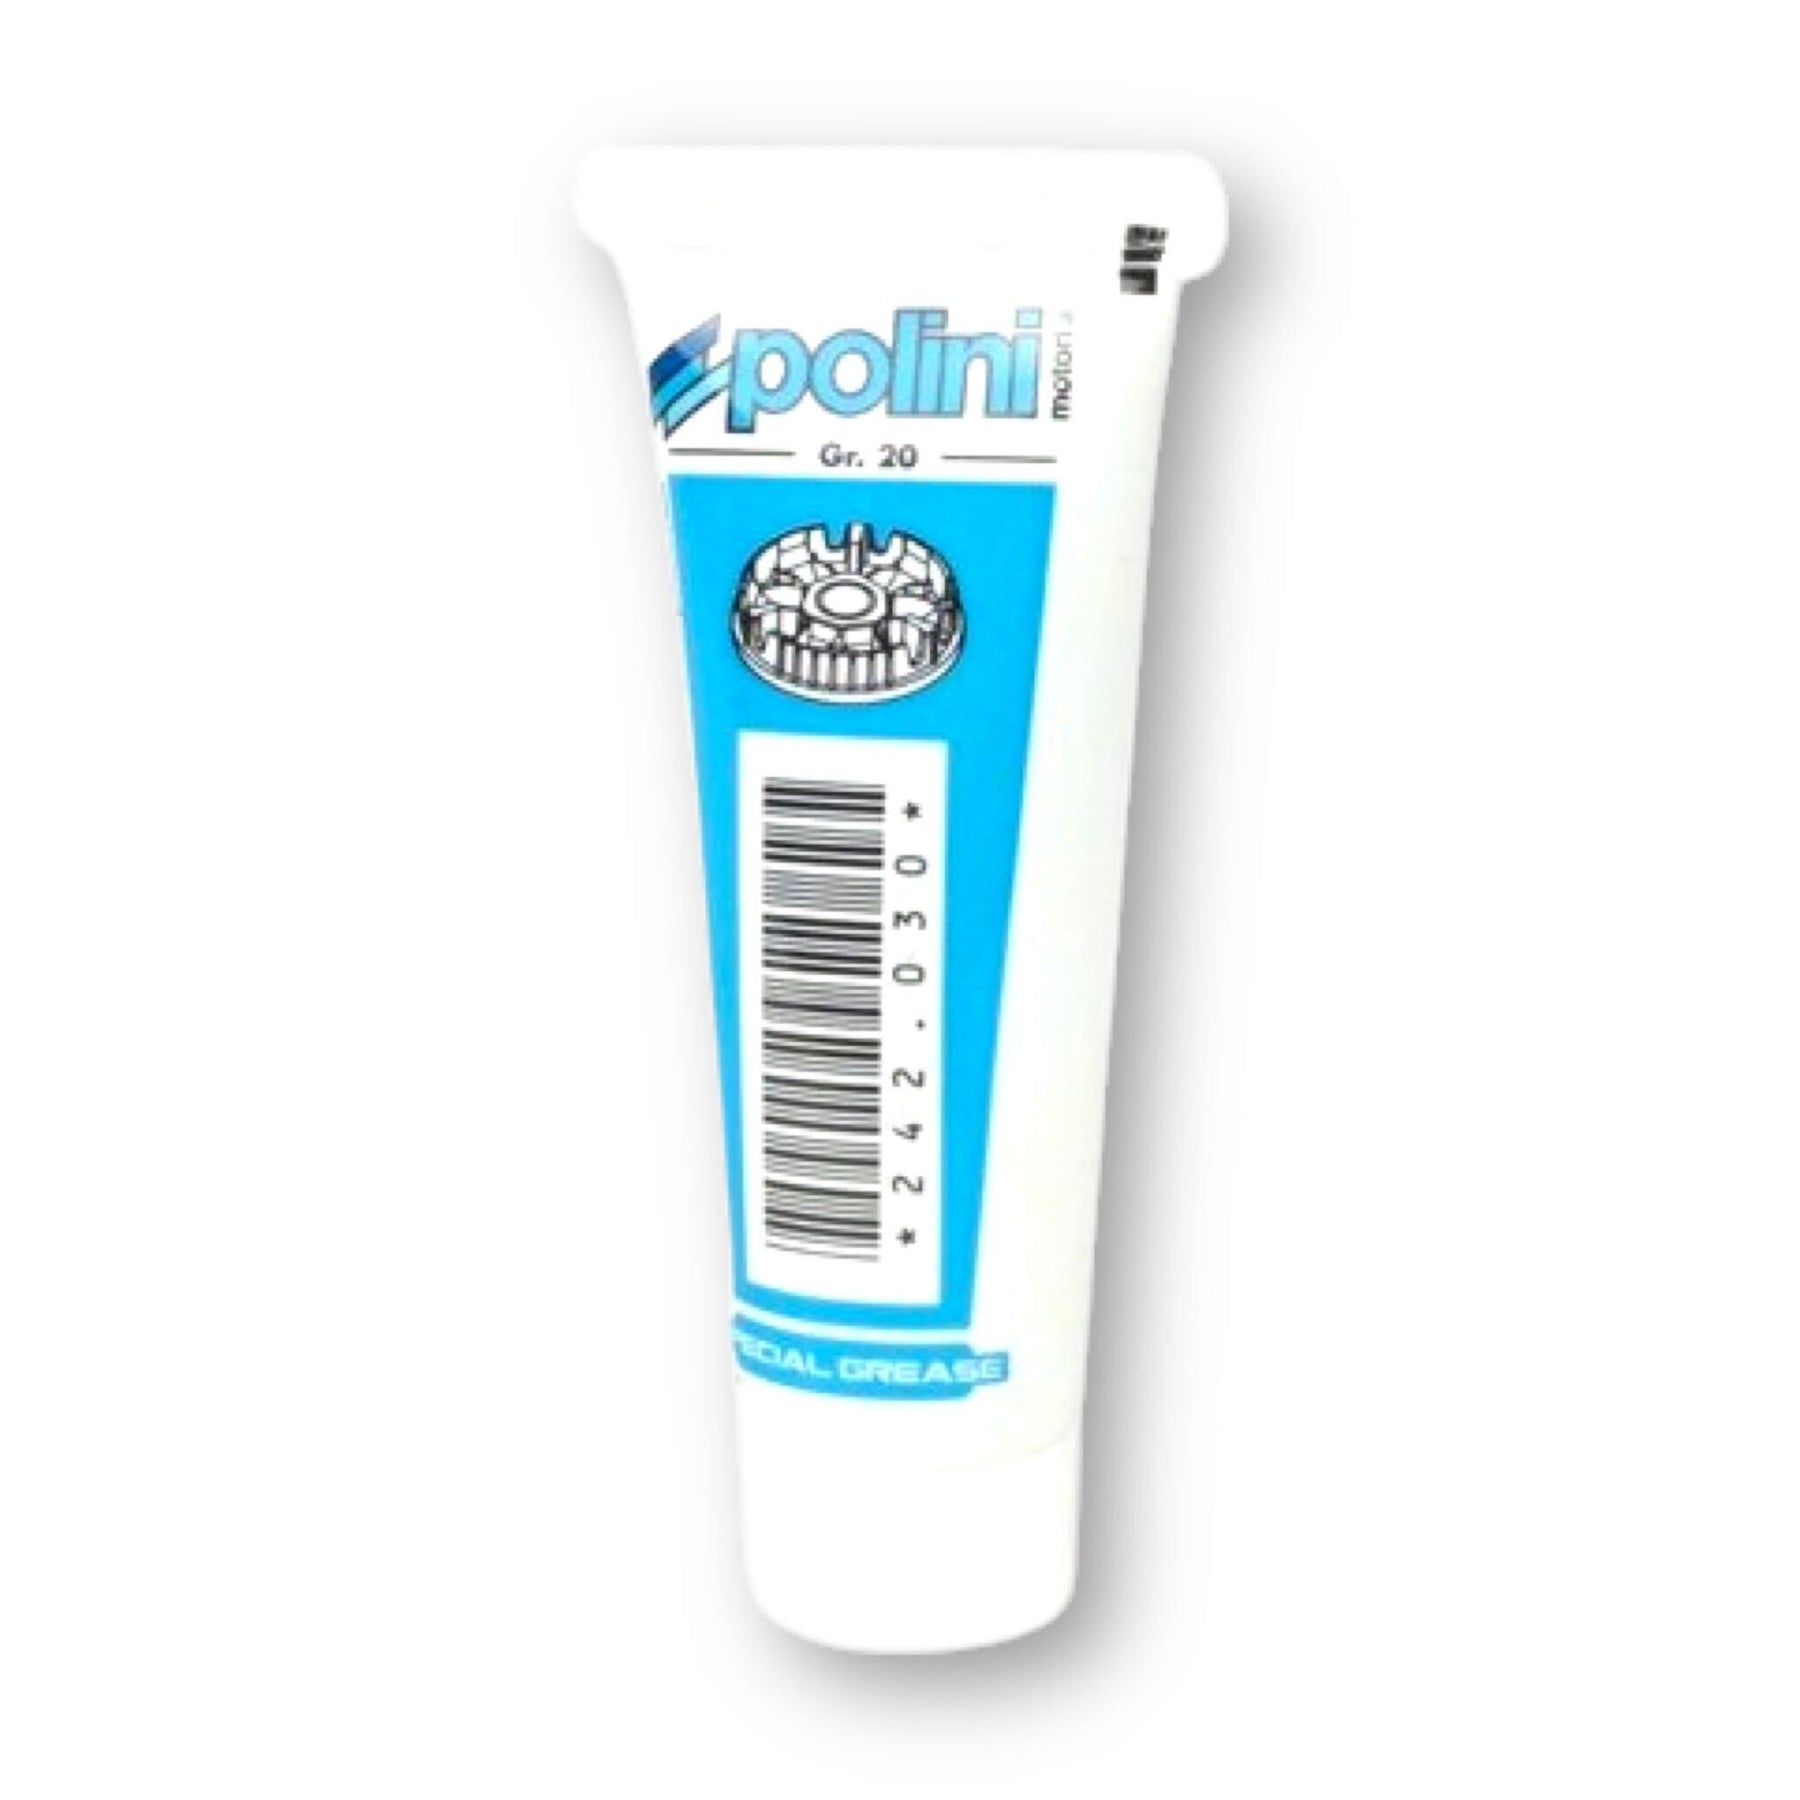 Polini Speed Control / Speed Drive Special Grease Heat Resistant 20g